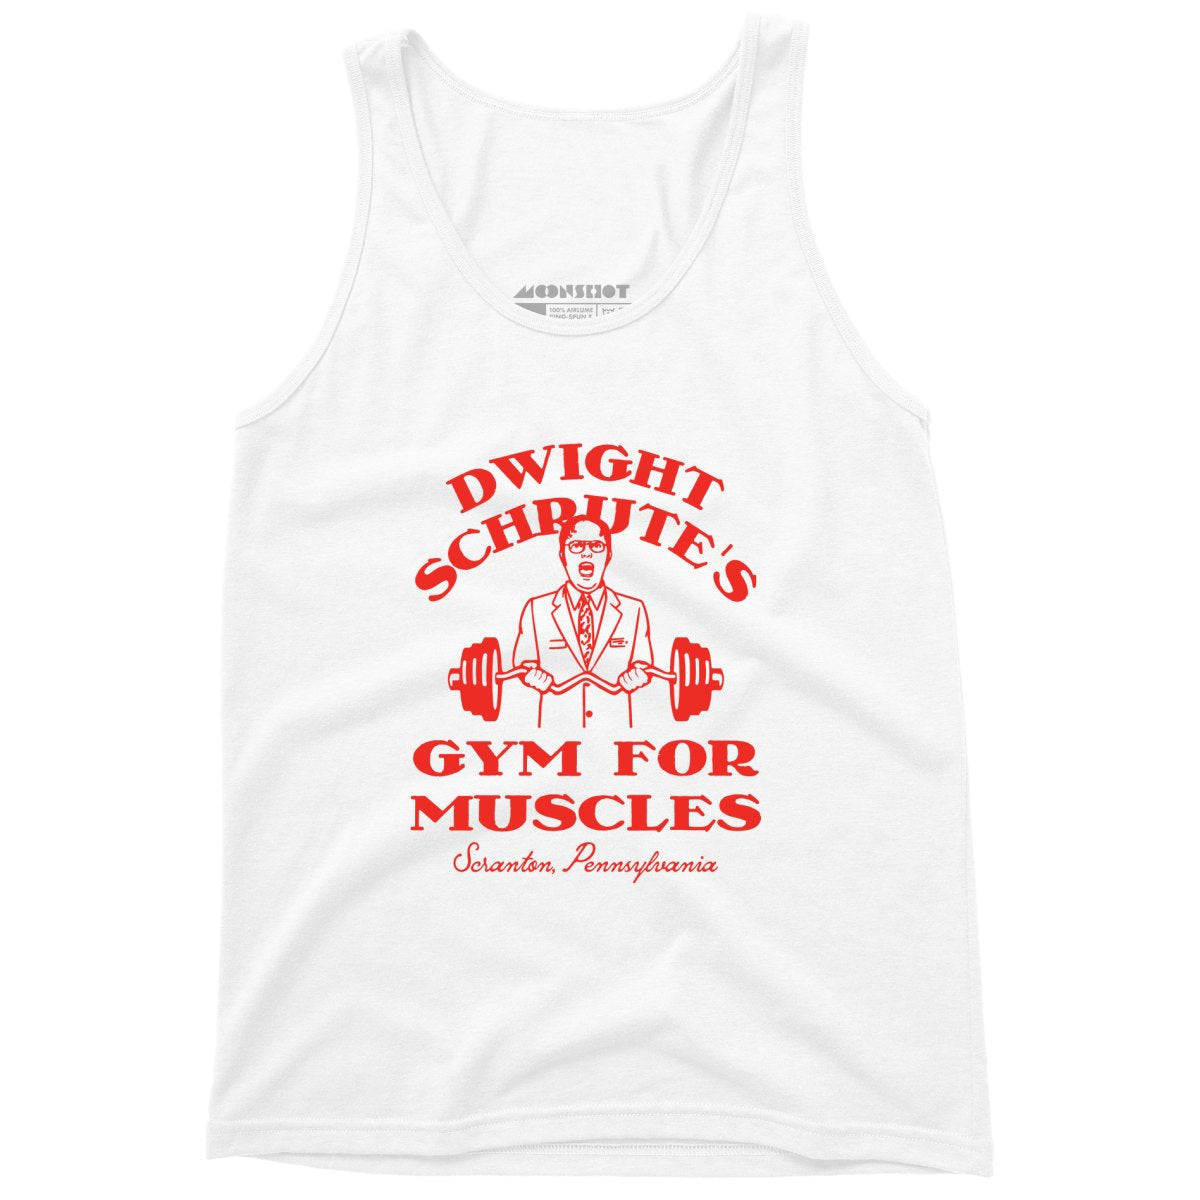 Dwight Schrute's Gym For Muscles - Unisex Tank Top